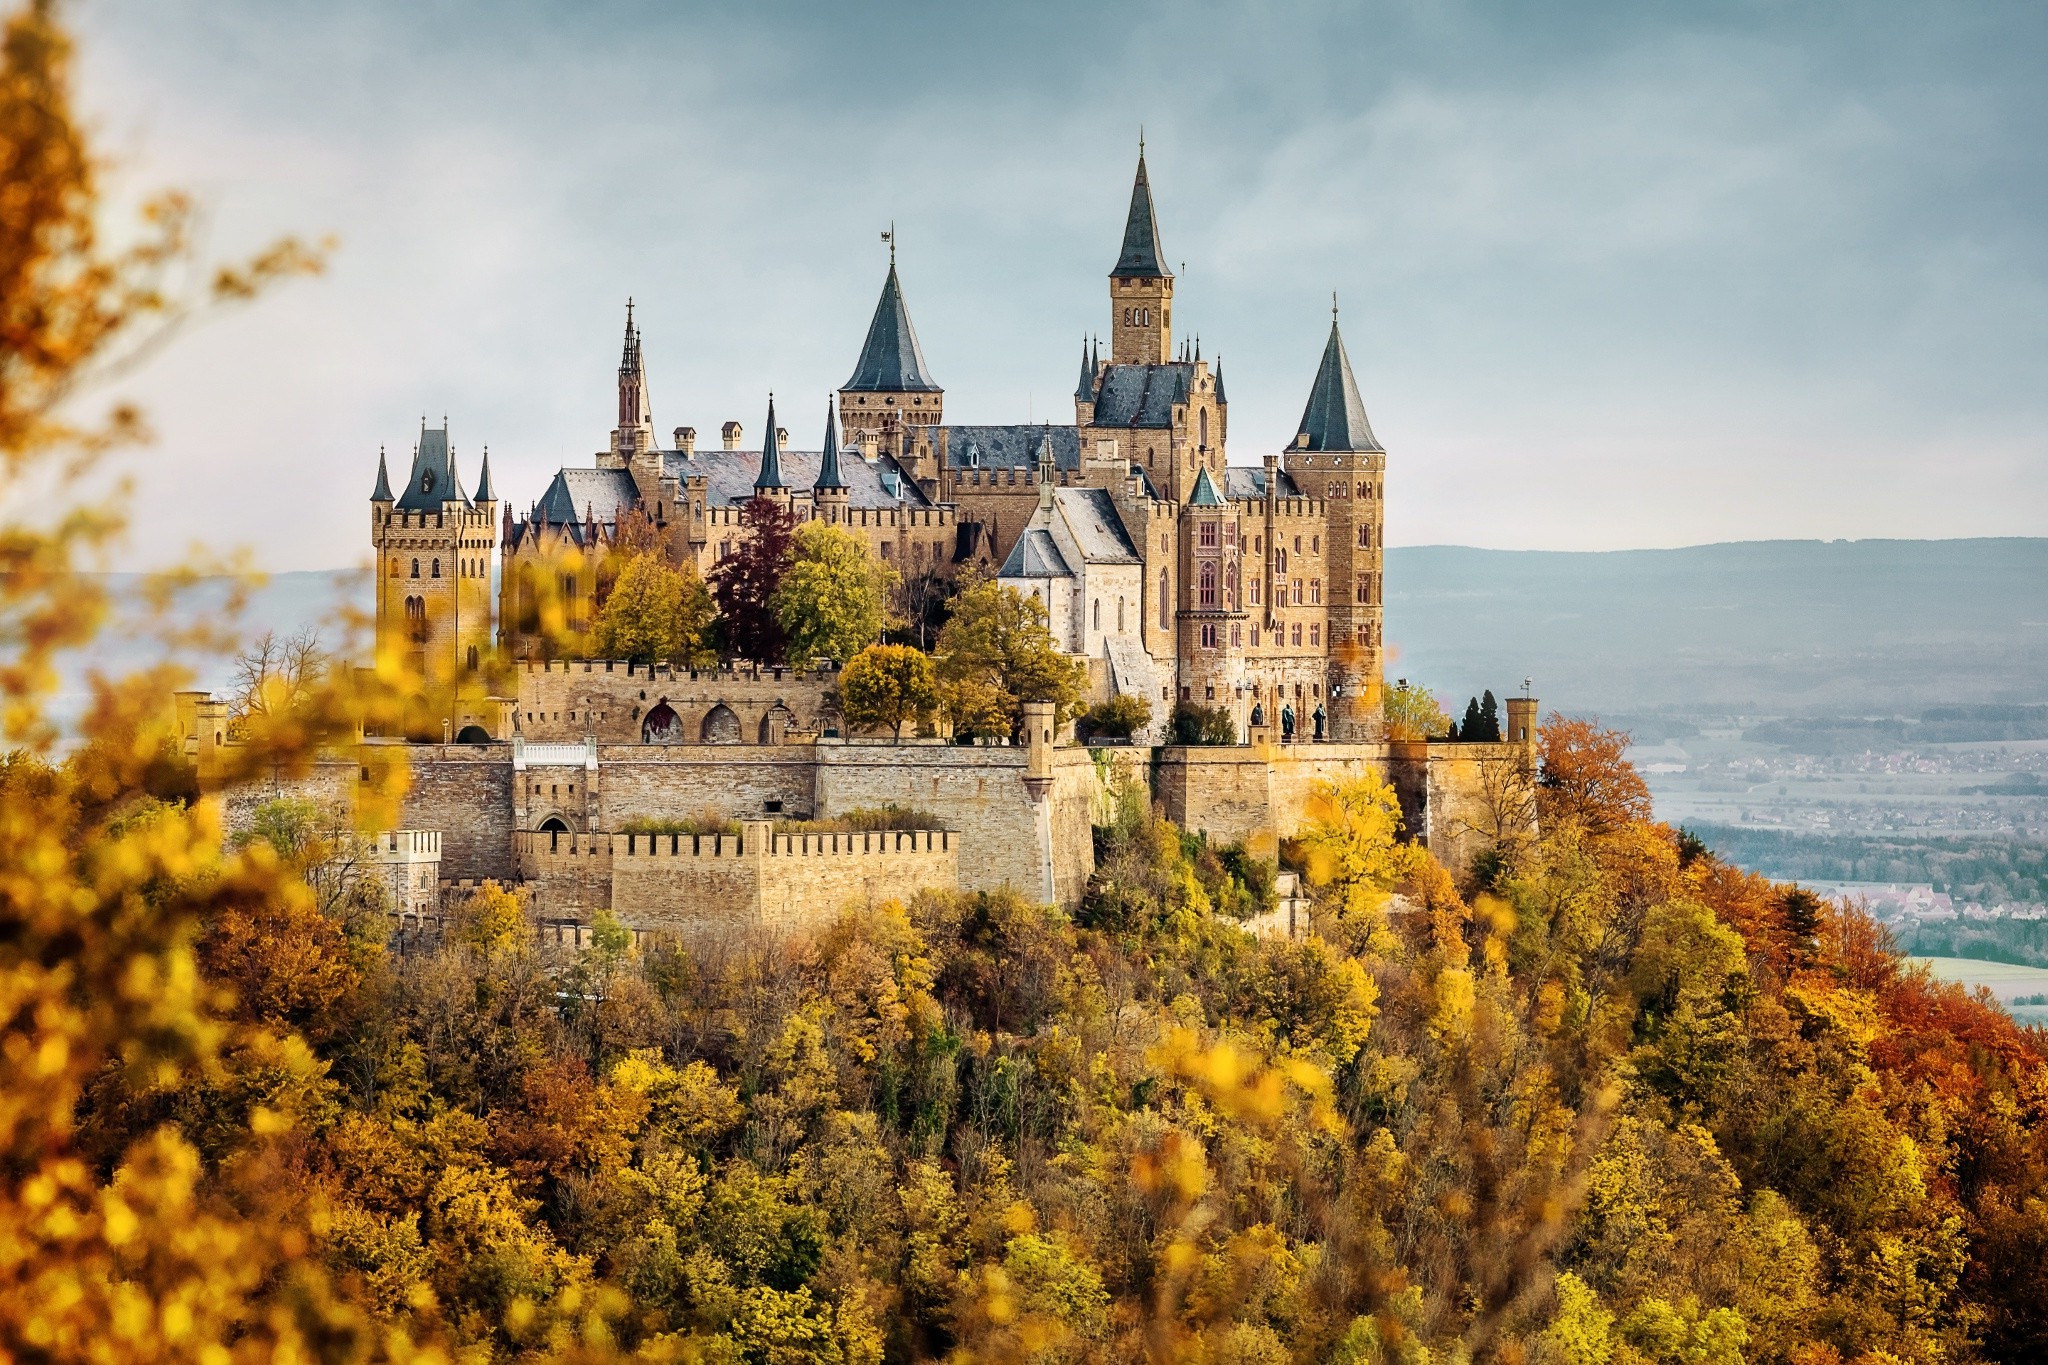 Wallpaper, 2048x1365 px, architecture, building, Burg Hohenzollern, castle, clouds, fall, forest, Germany, hill, landscape, leaves, nature, tower, trees, walls 2048x1365